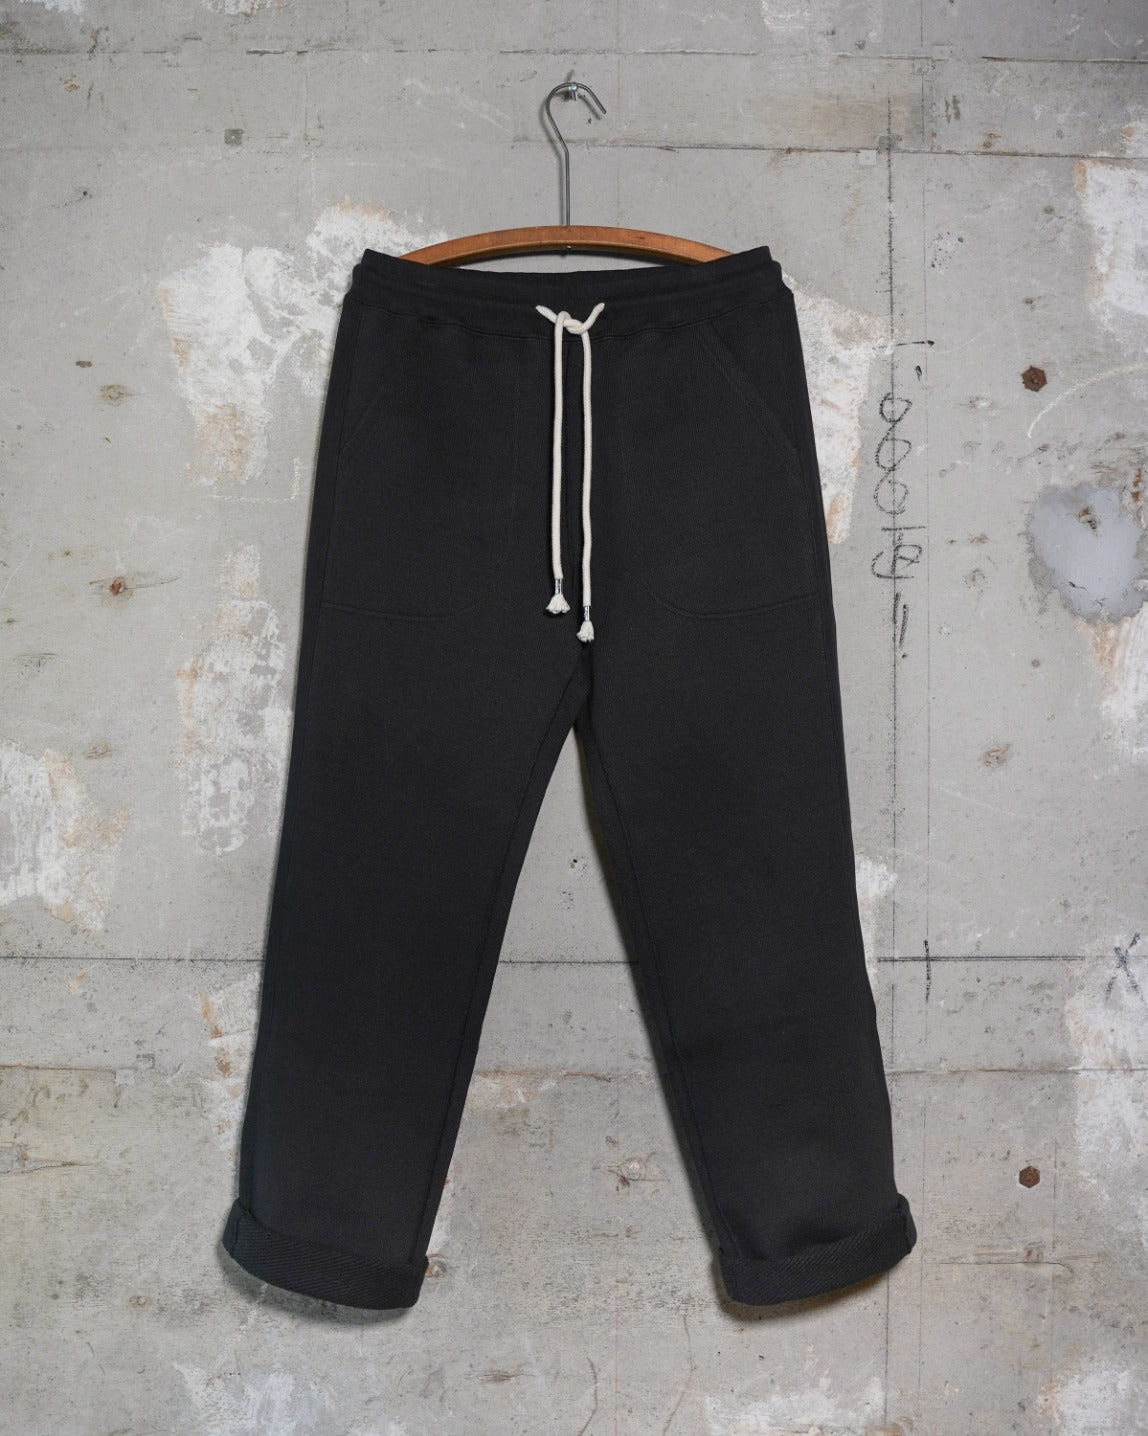 Sweatpants - 701gsm Double Heavyweight French Terry - Sumi Black